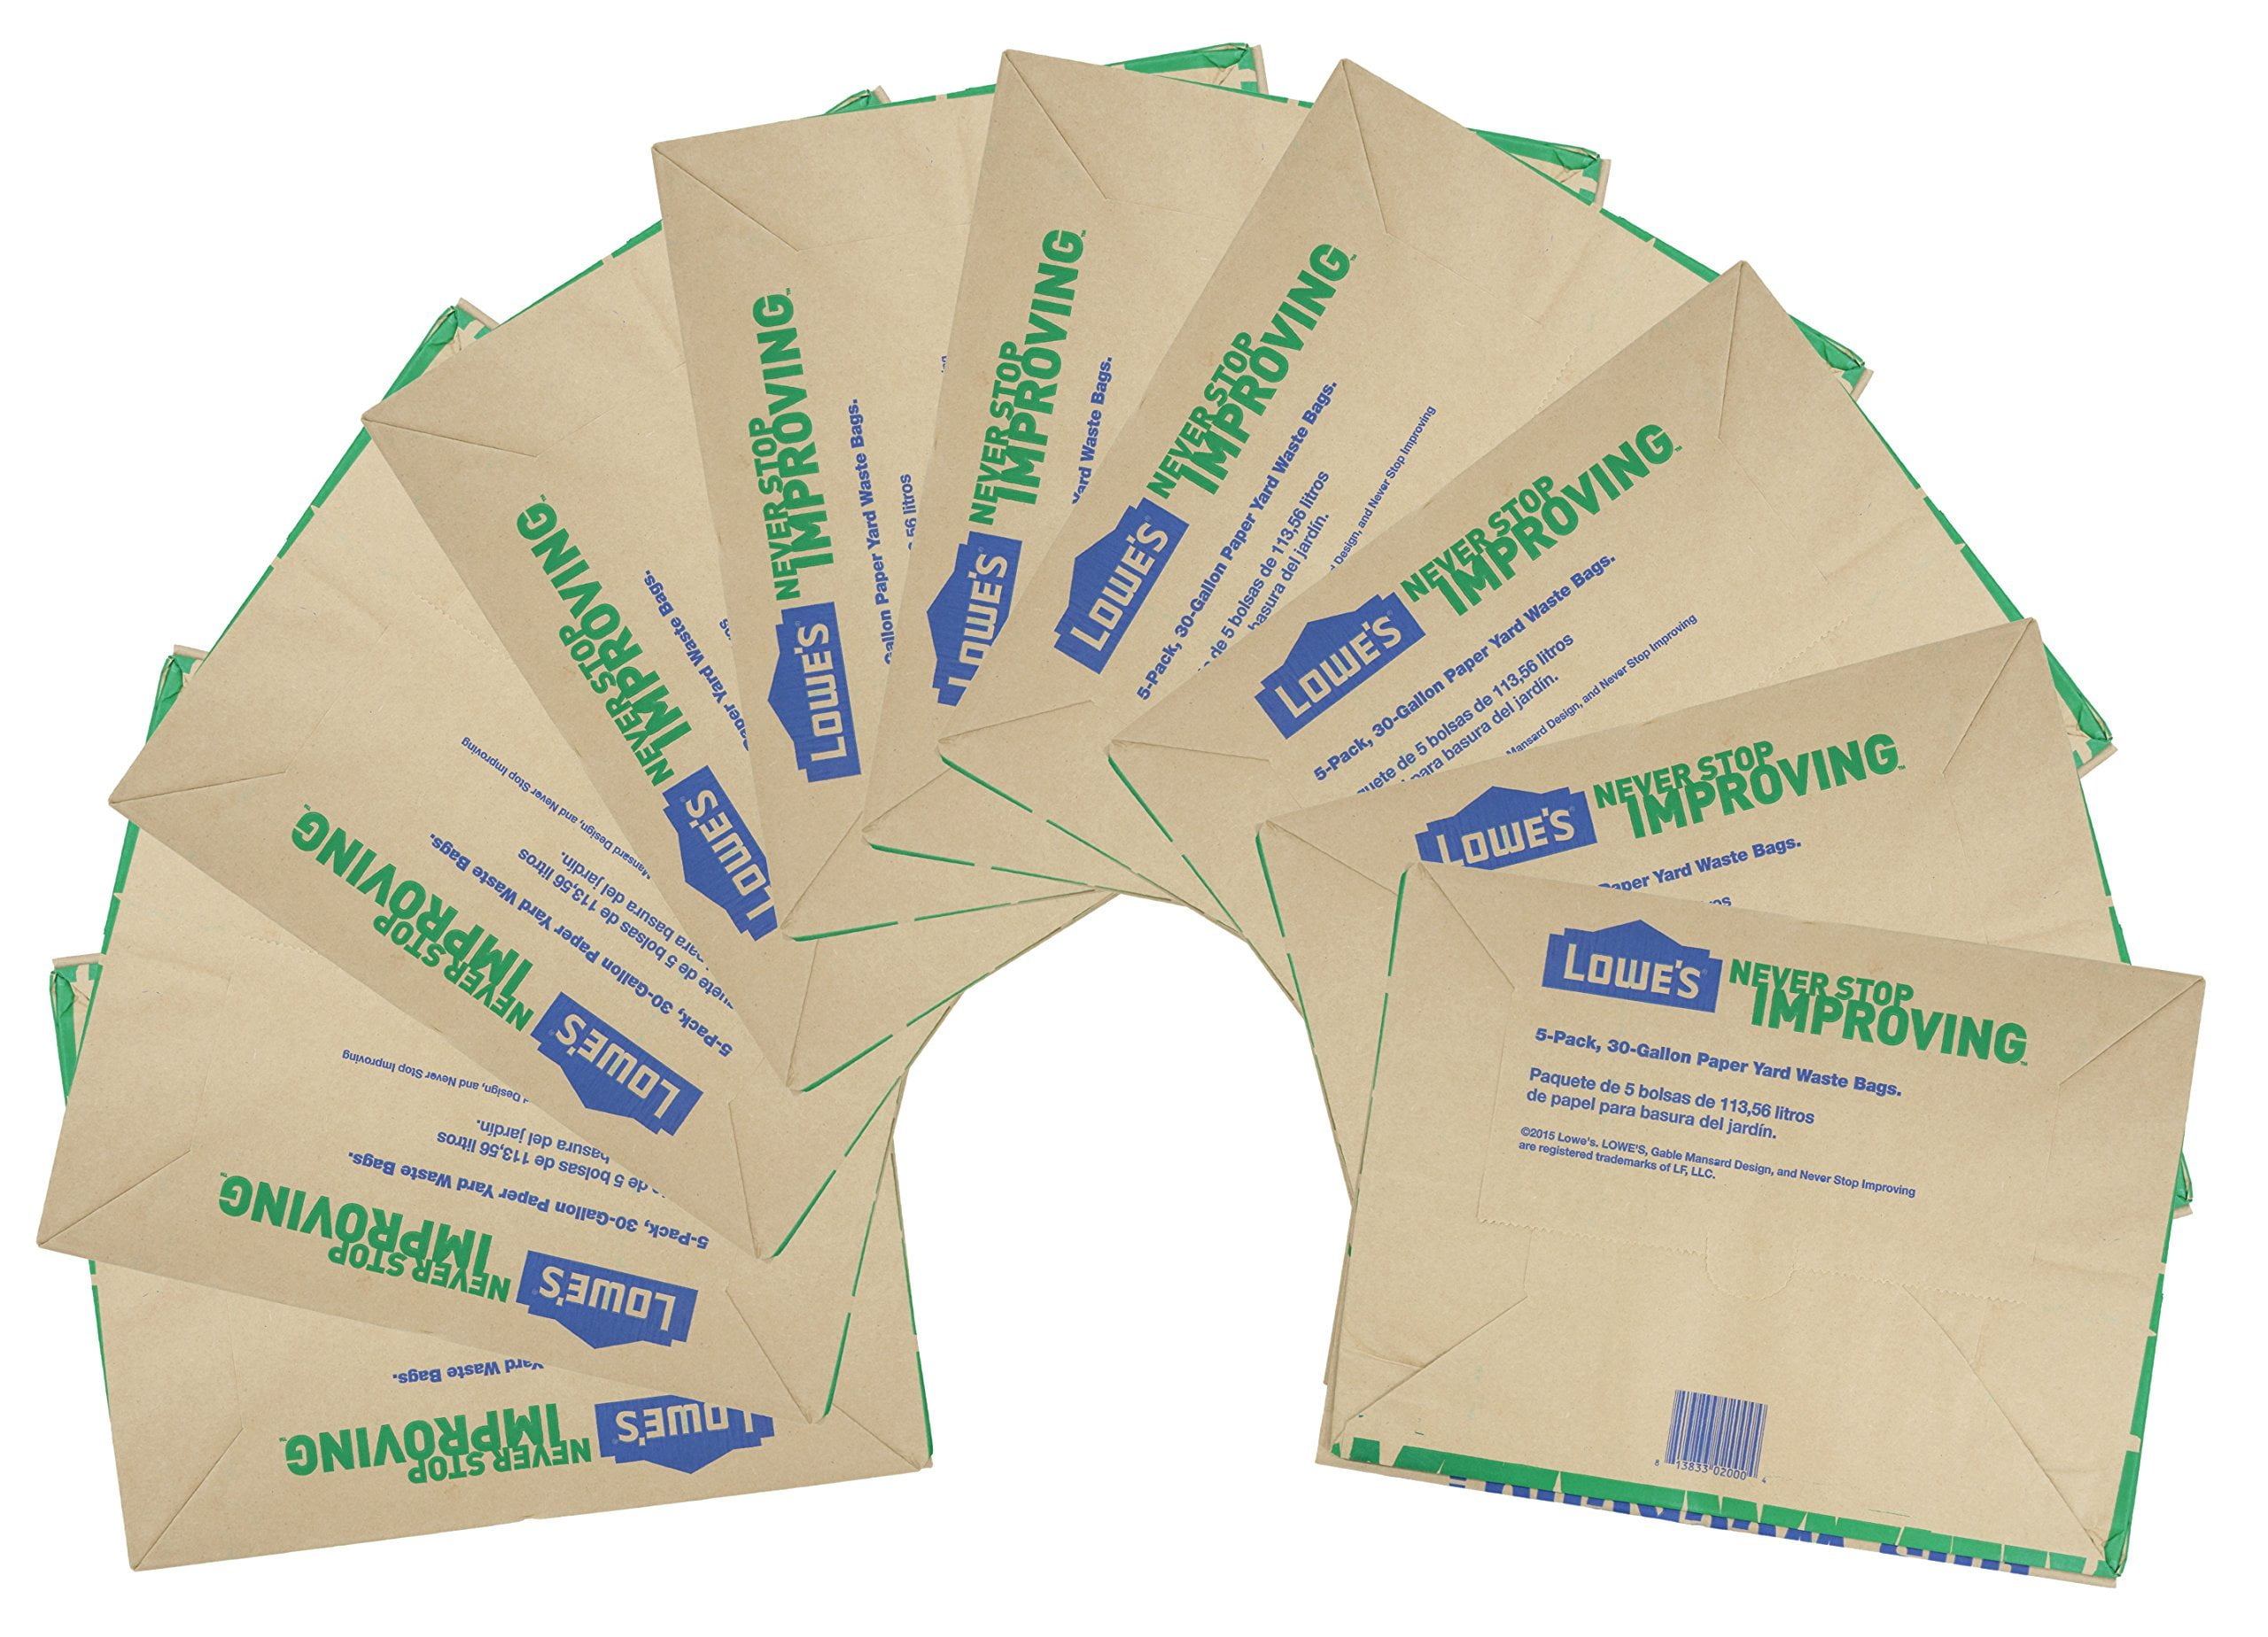 30 Gallon Paper Lawn and Leaf Bags - 5 Count at Menards®